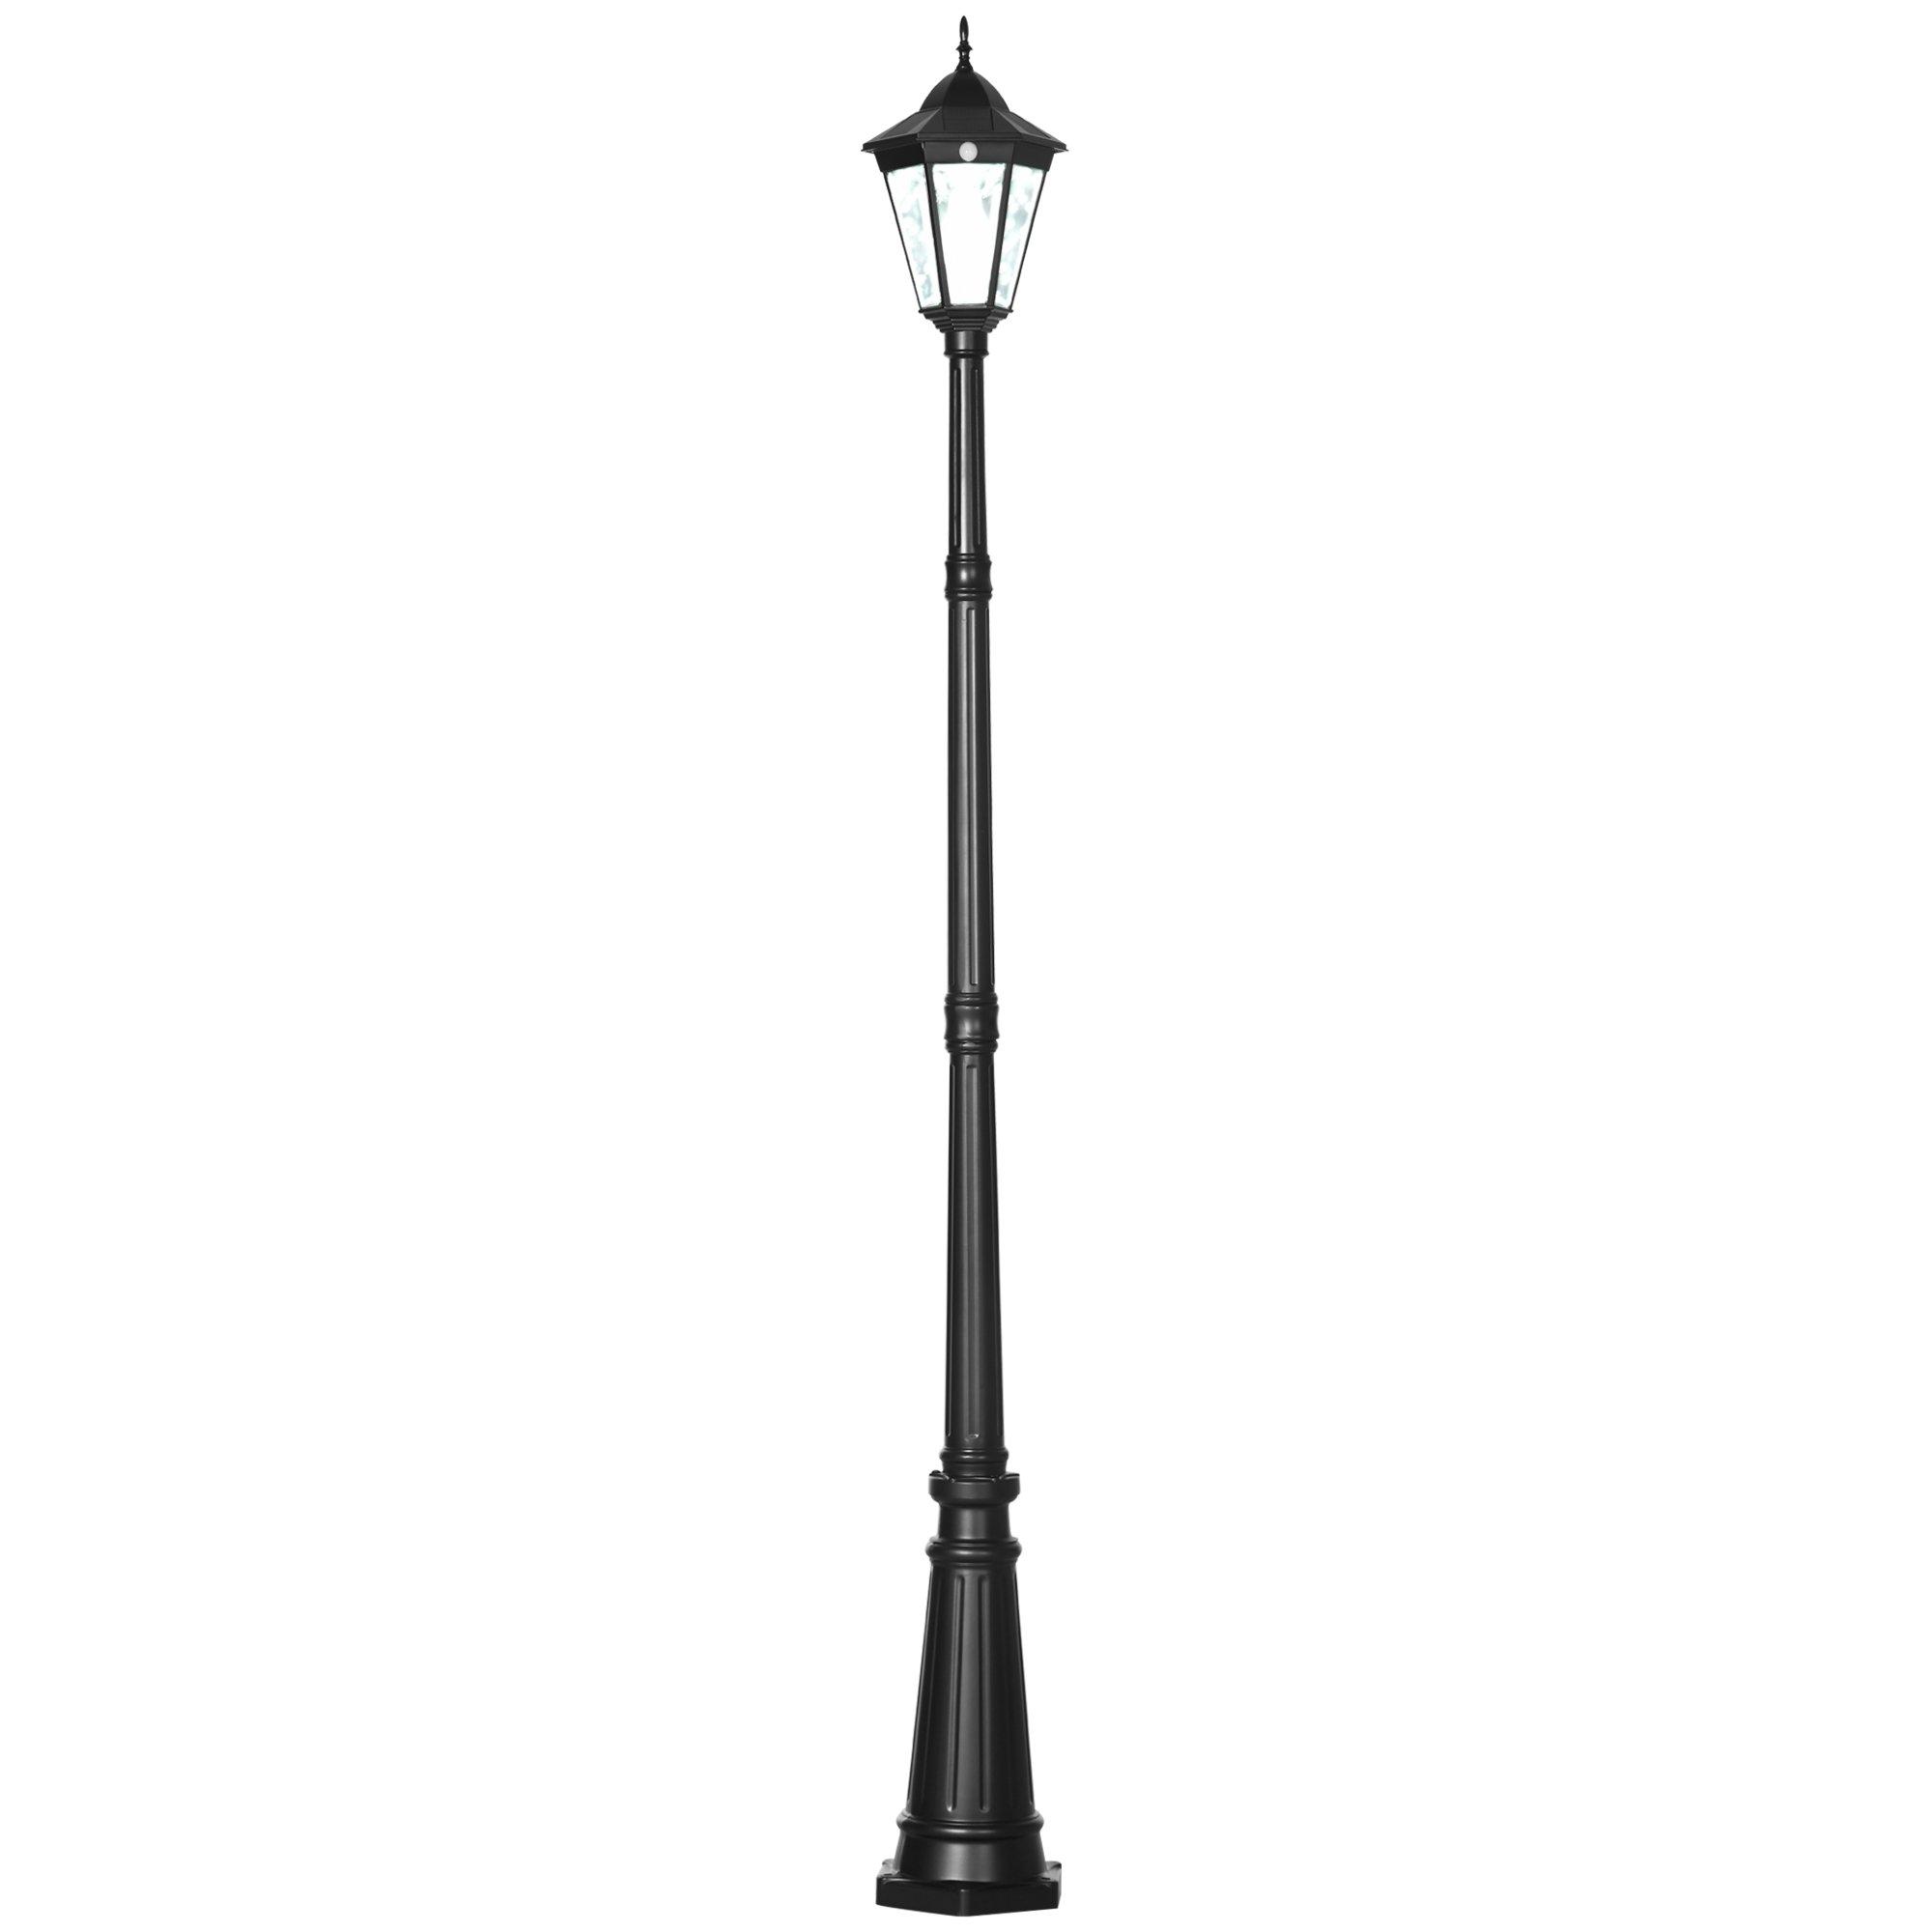 2.4 m Garden Lamp Post Light with Aluminium Frame for Lawn Pathway Driveway